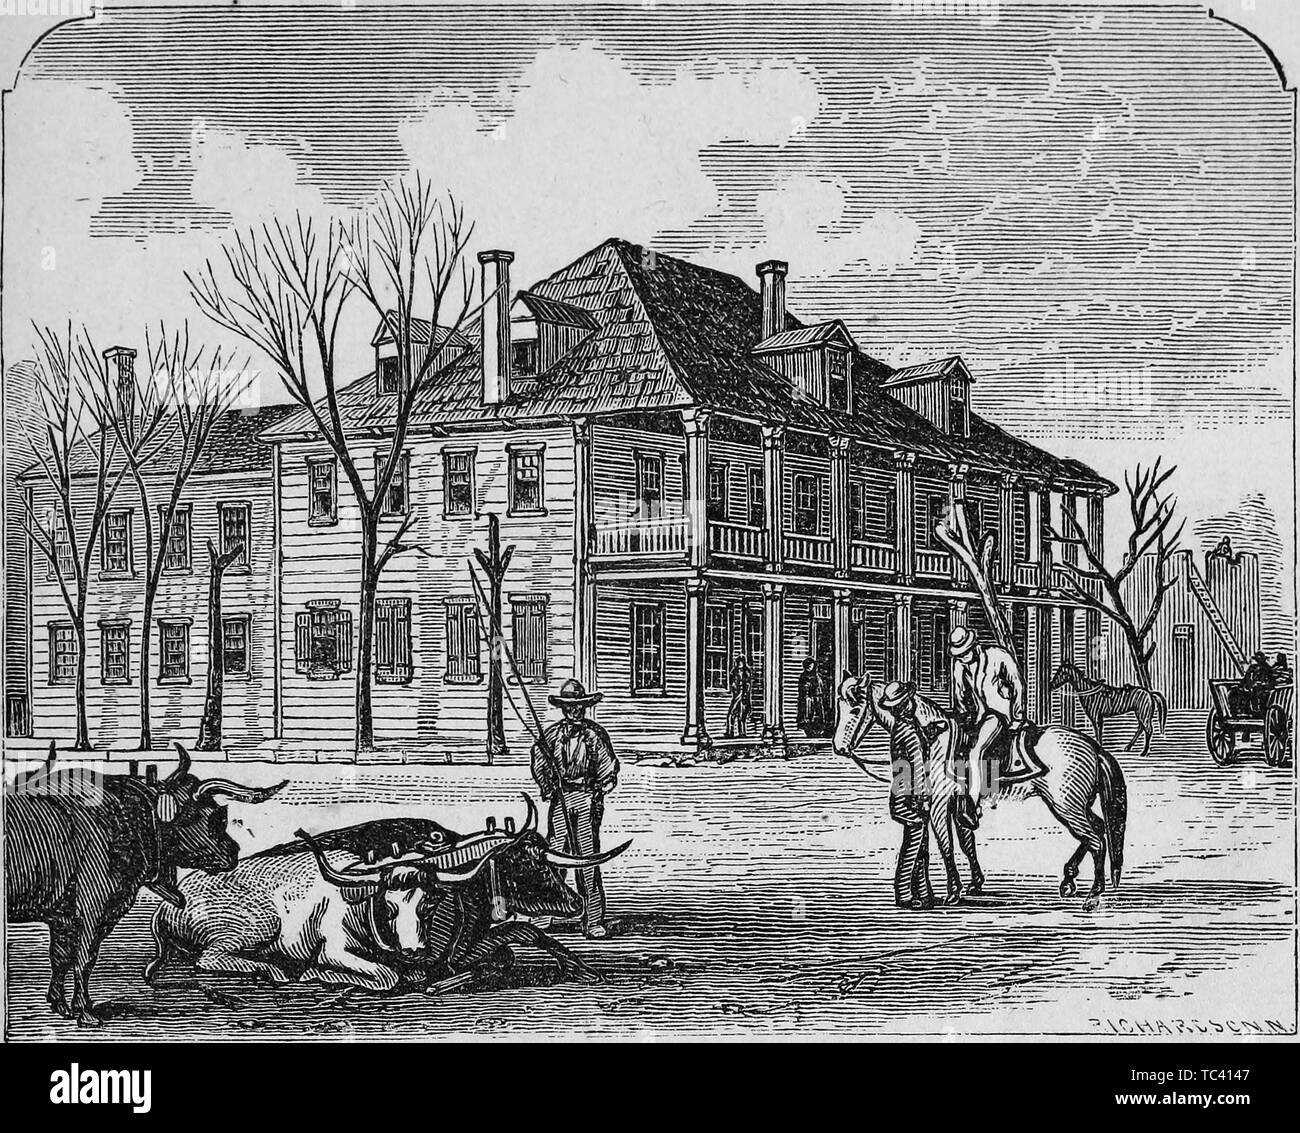 Engraving of the house in which First Congress met, from the book 'Brief history of Texas from its earliest settlement to which is appended the constitution of the state' by De Witt Clinton Baker, 1873. Courtesy Internet Archive. () Stock Photo